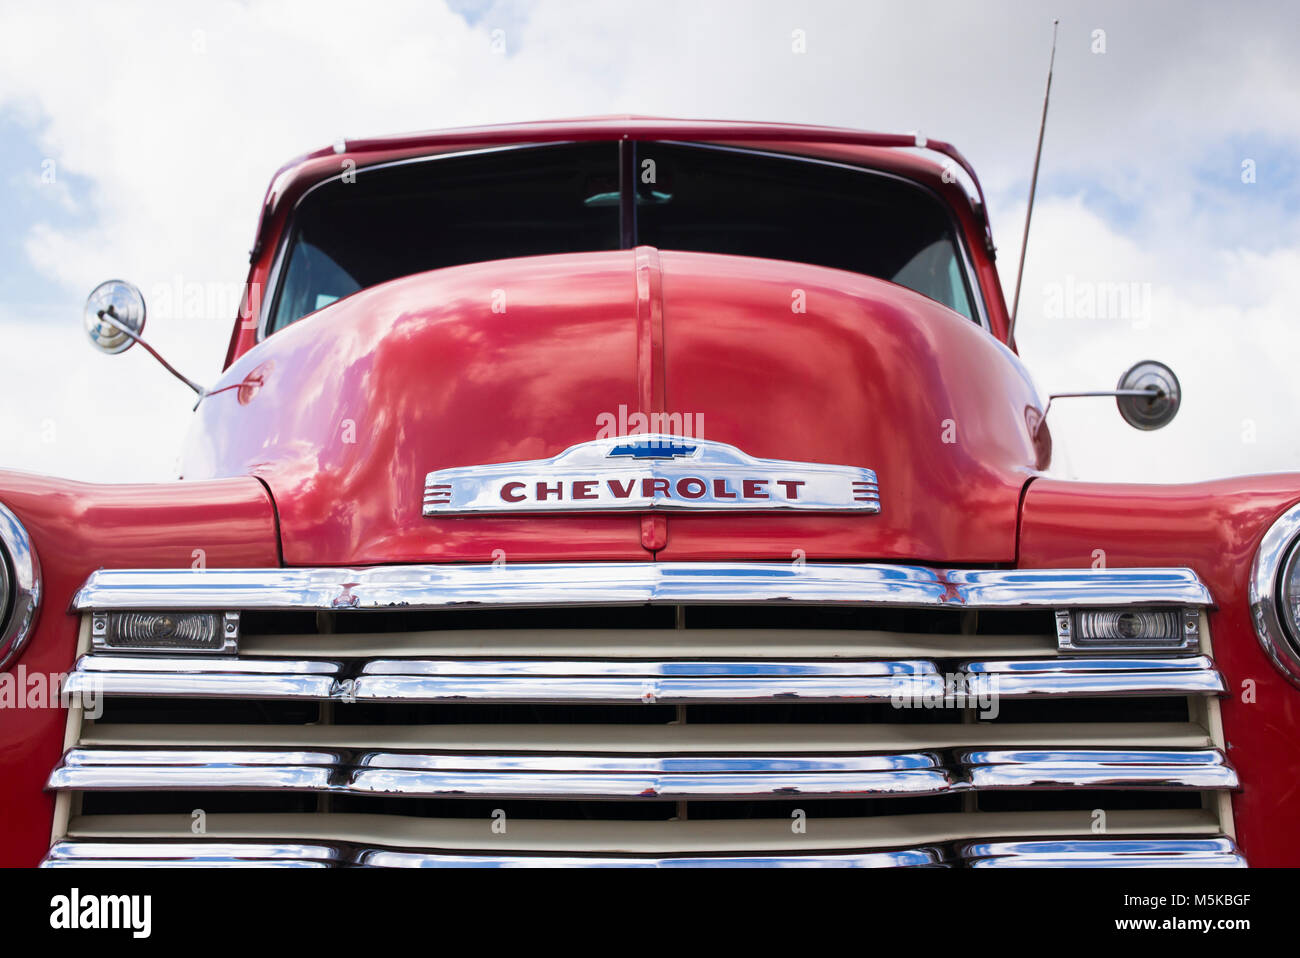 1951 Red Chevrolet pickup truck at an american car show. UK Stock Photo